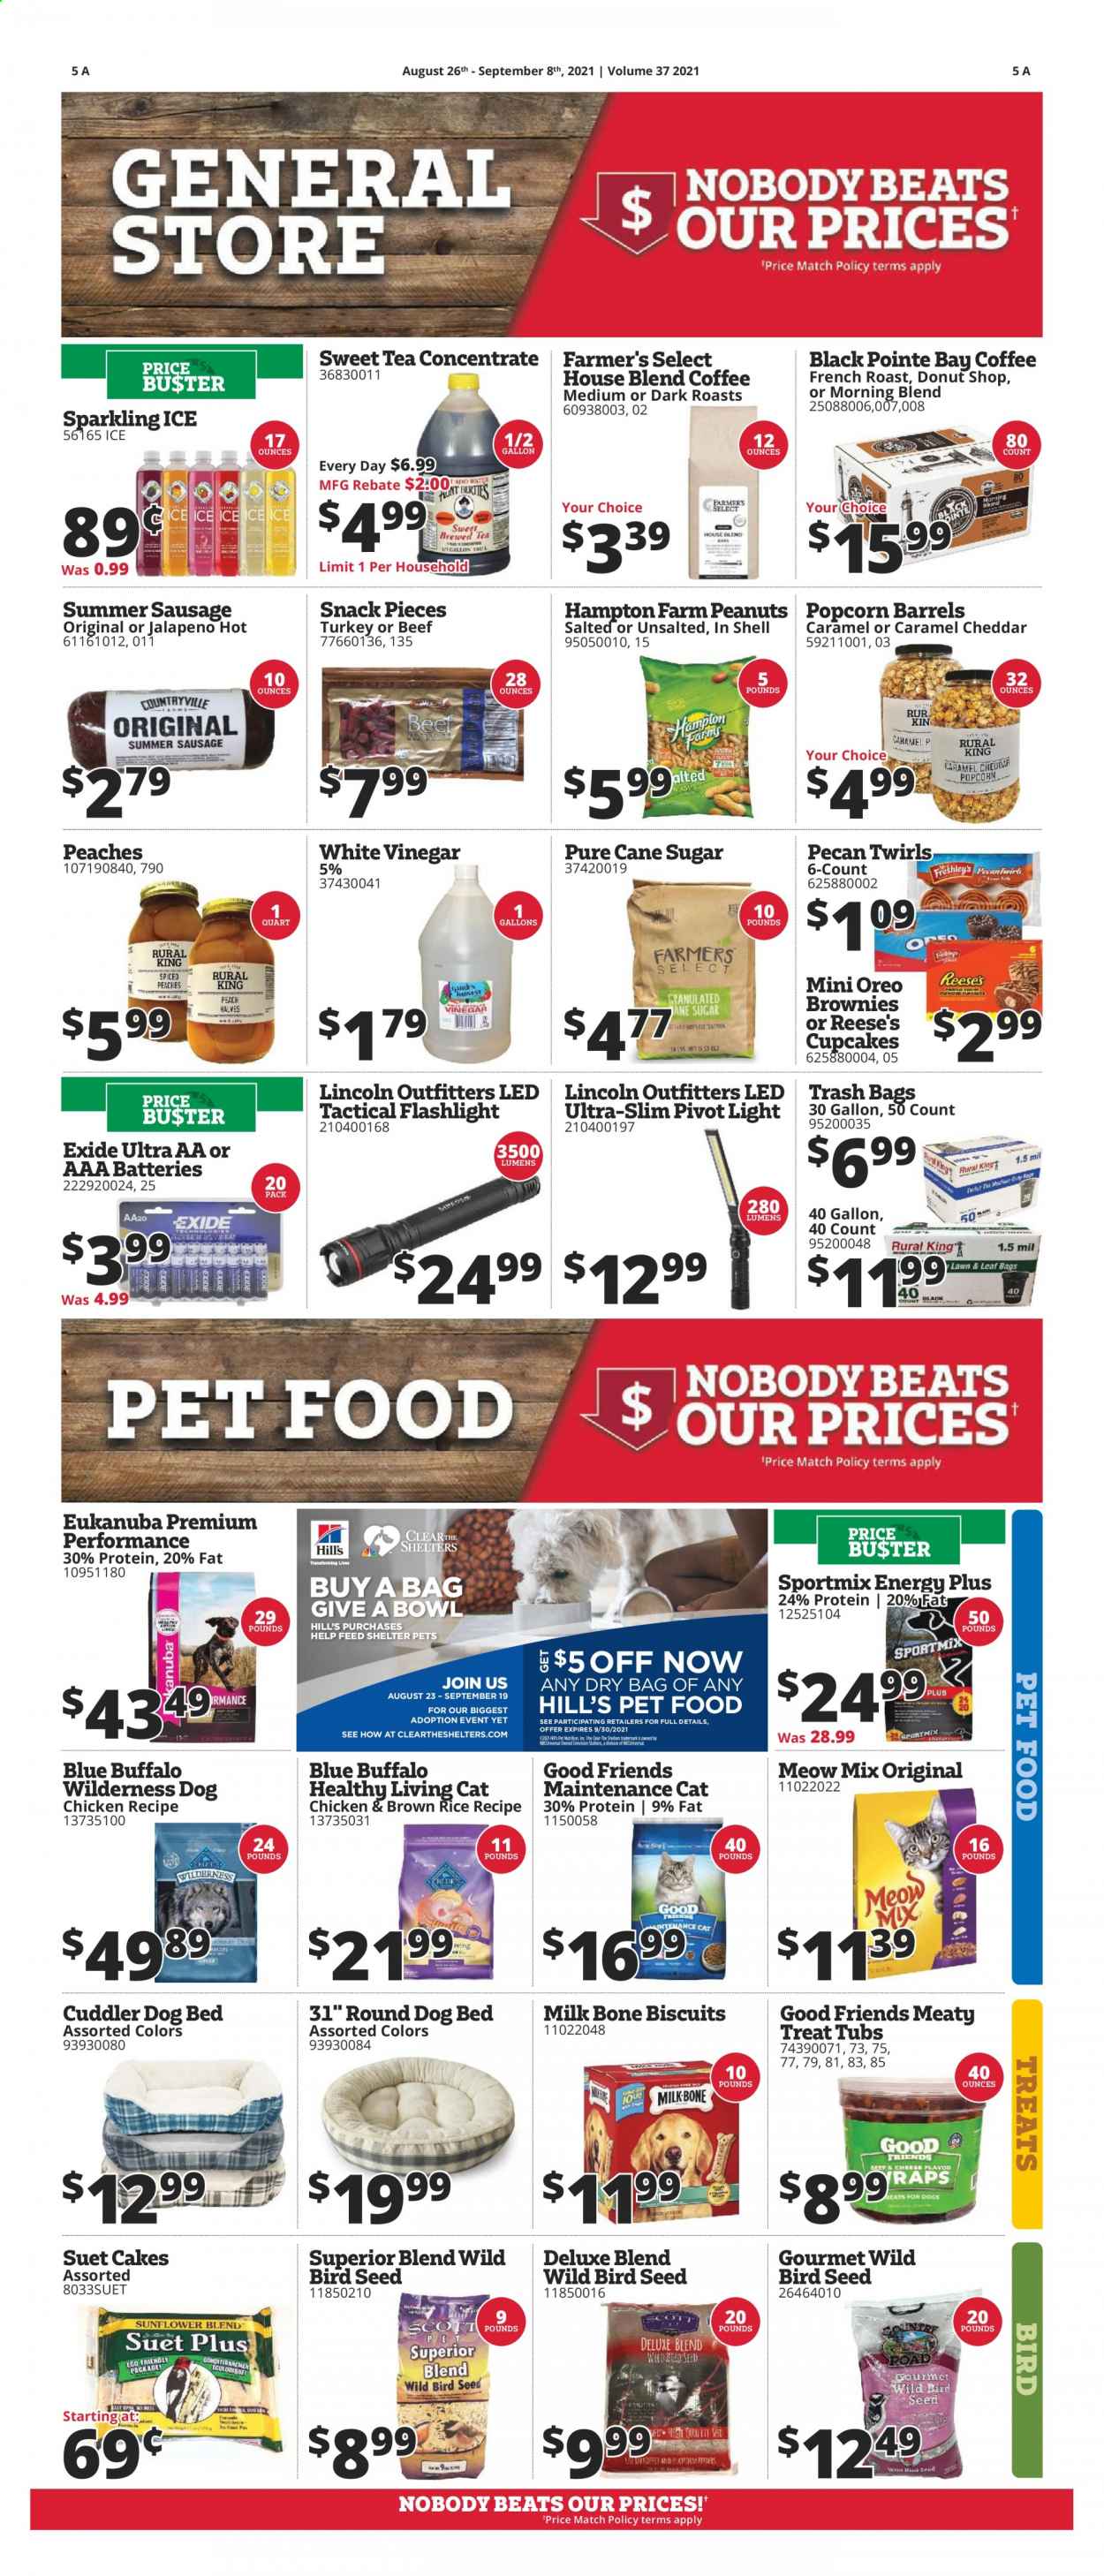 thumbnail - Rural King Flyer - 08/26/2021 - 09/08/2021 - Sales products - Oreo, snack, brownies, Reese's, biscuit, popcorn, cane sugar, sugar, brown rice, vinegar, peanuts, tea, coffee, trash bags, AAA batteries, dog bed, animal food, bird food, Blue Buffalo, suet, plant seeds, Hill's, Meow Mix, Eukanuba, suet cakes, flashlight, Shell. Page 8.